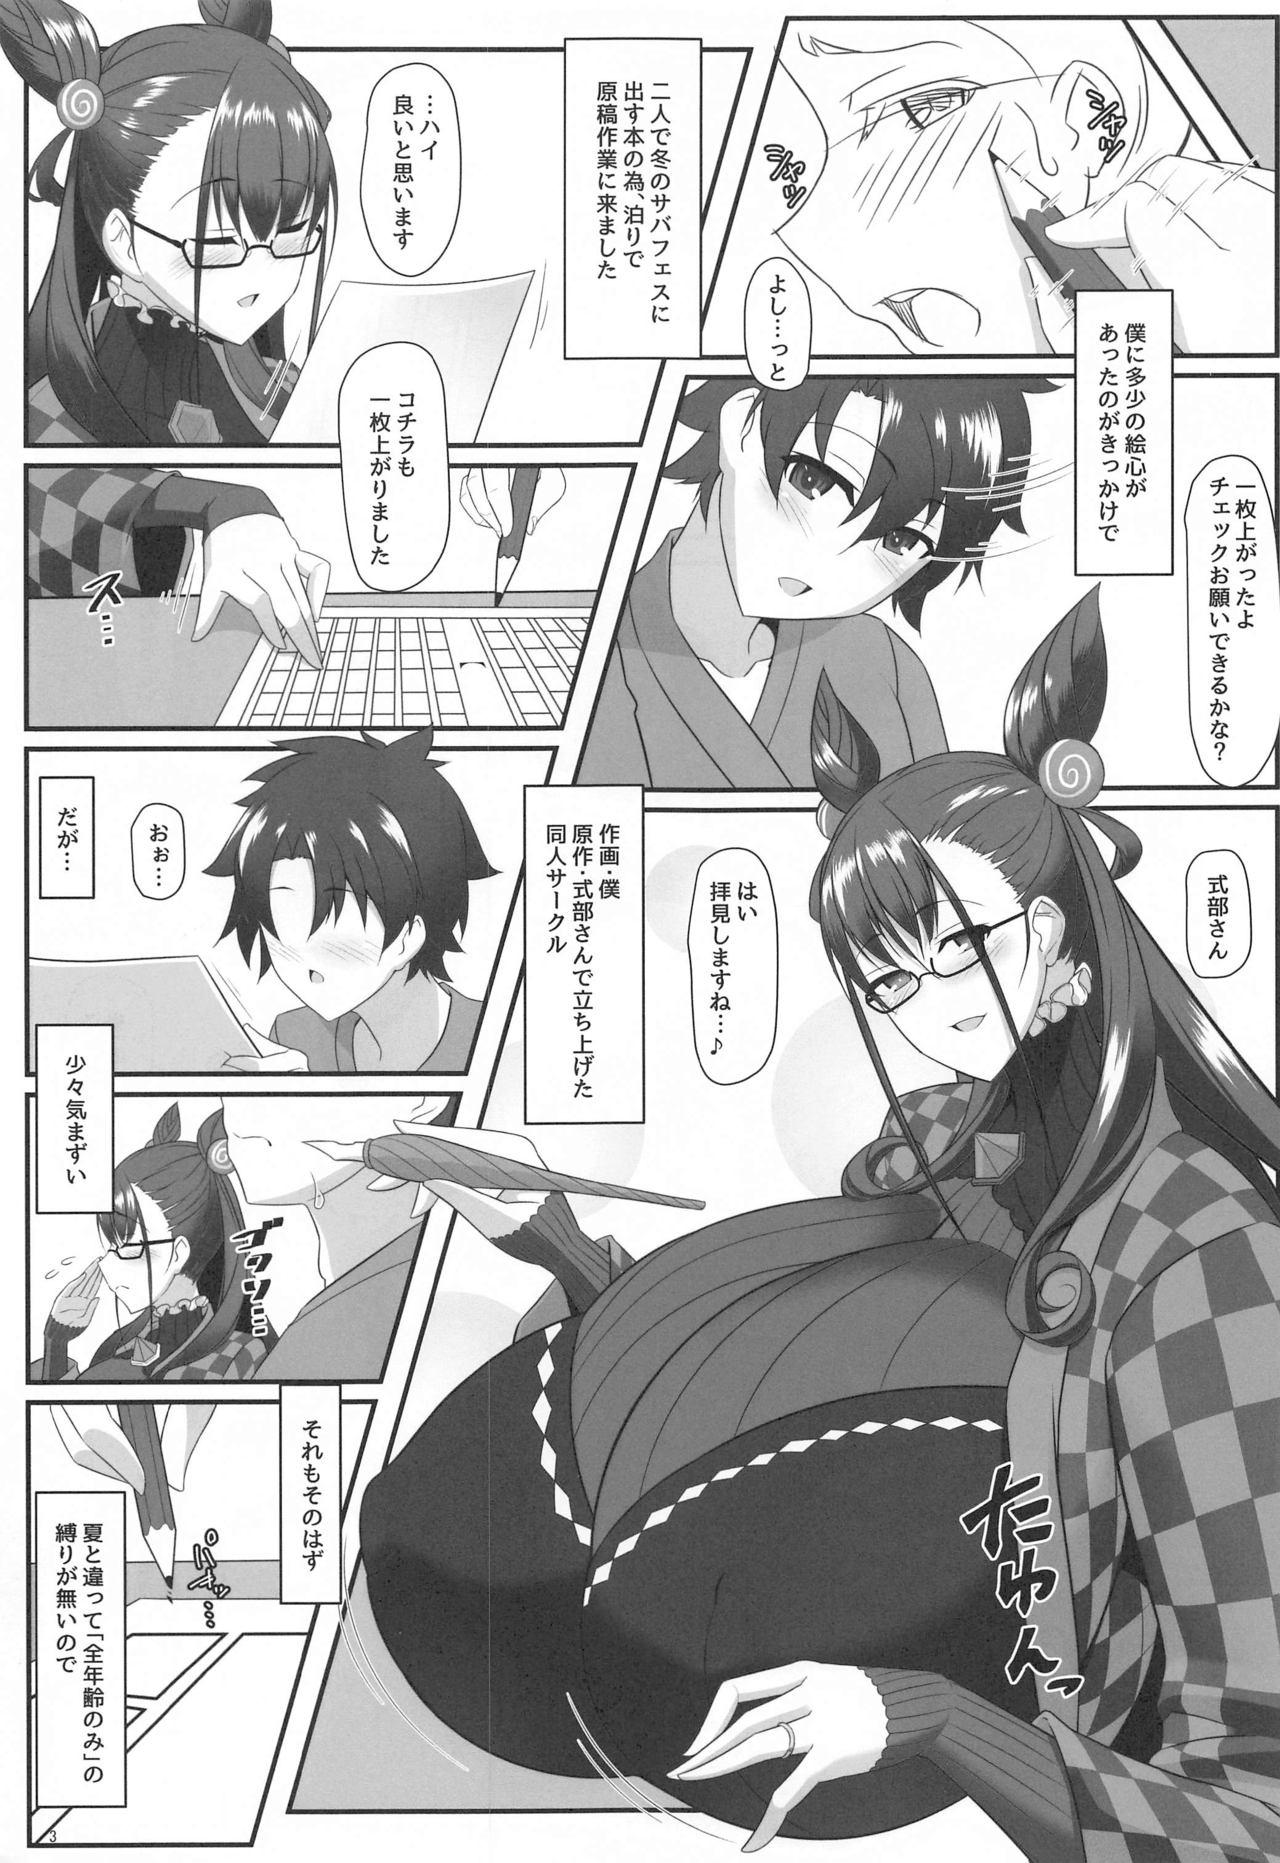 Stepdaughter shishotohitomiau - Fate grand order Bigtits - Page 2